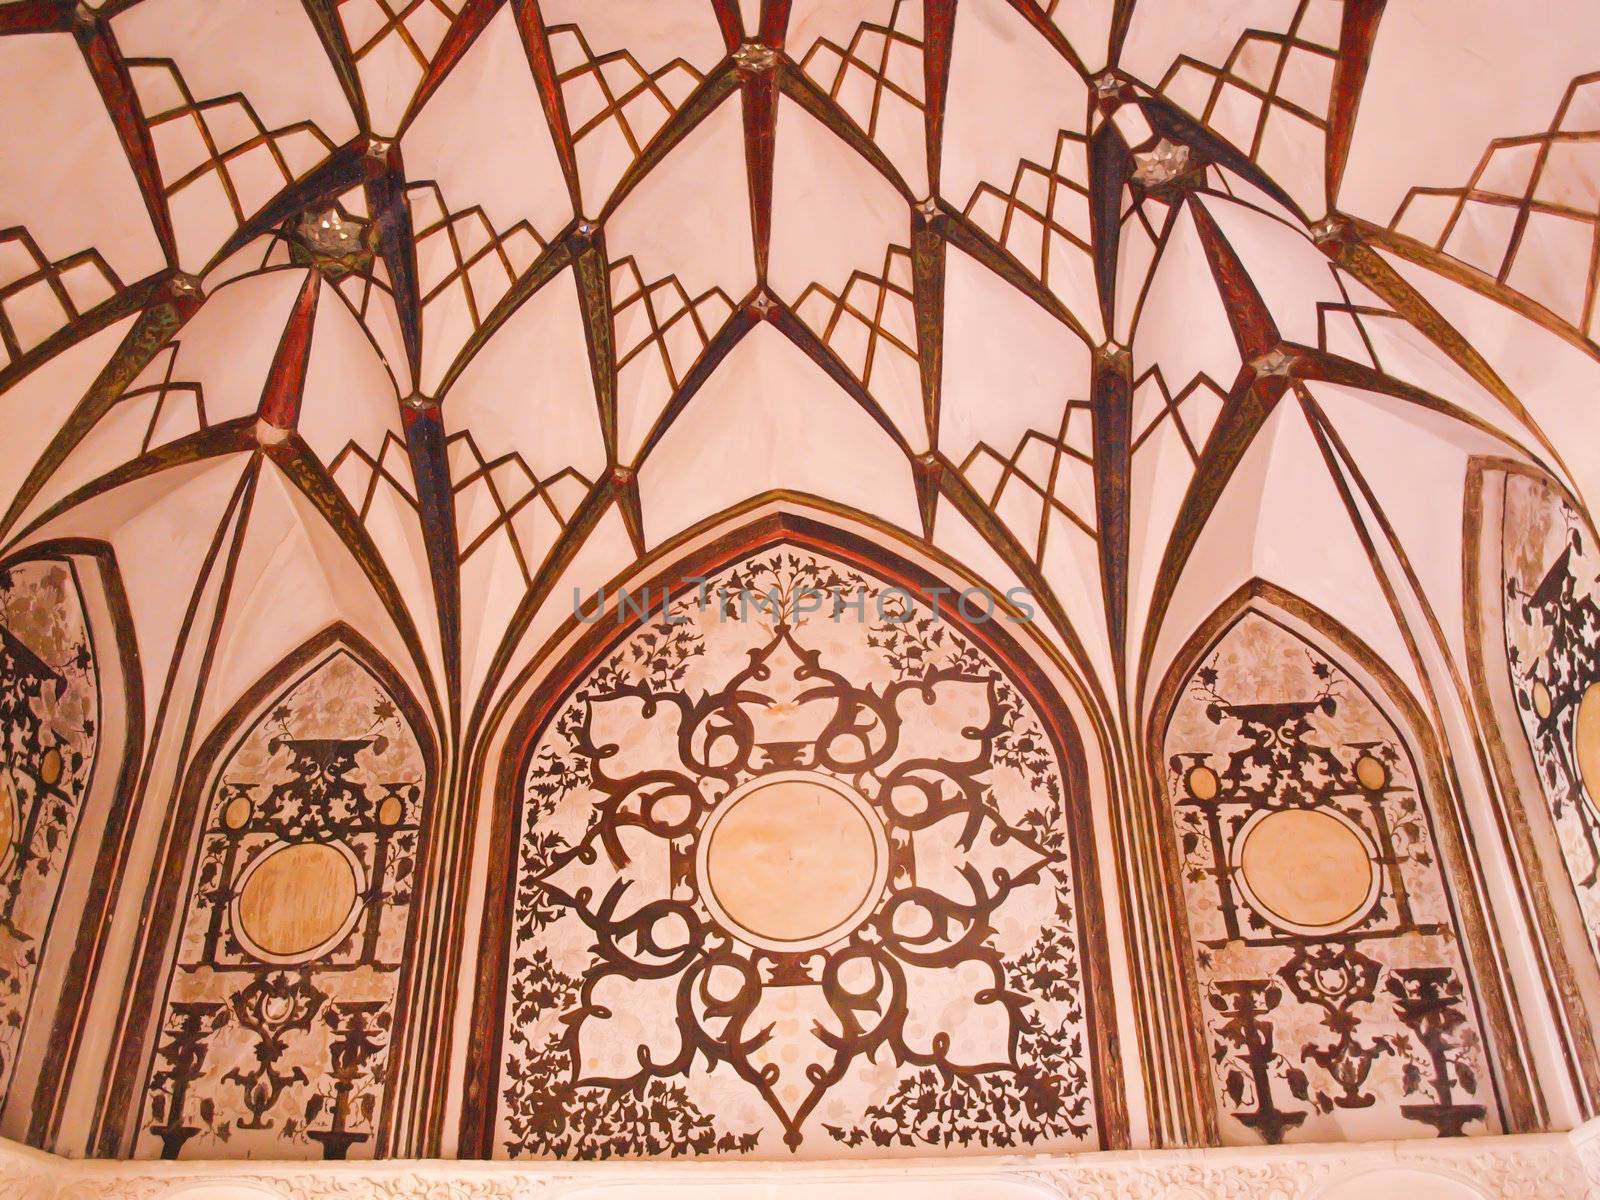 Ceiling decoration interior of historic old house in Kashan, Iran